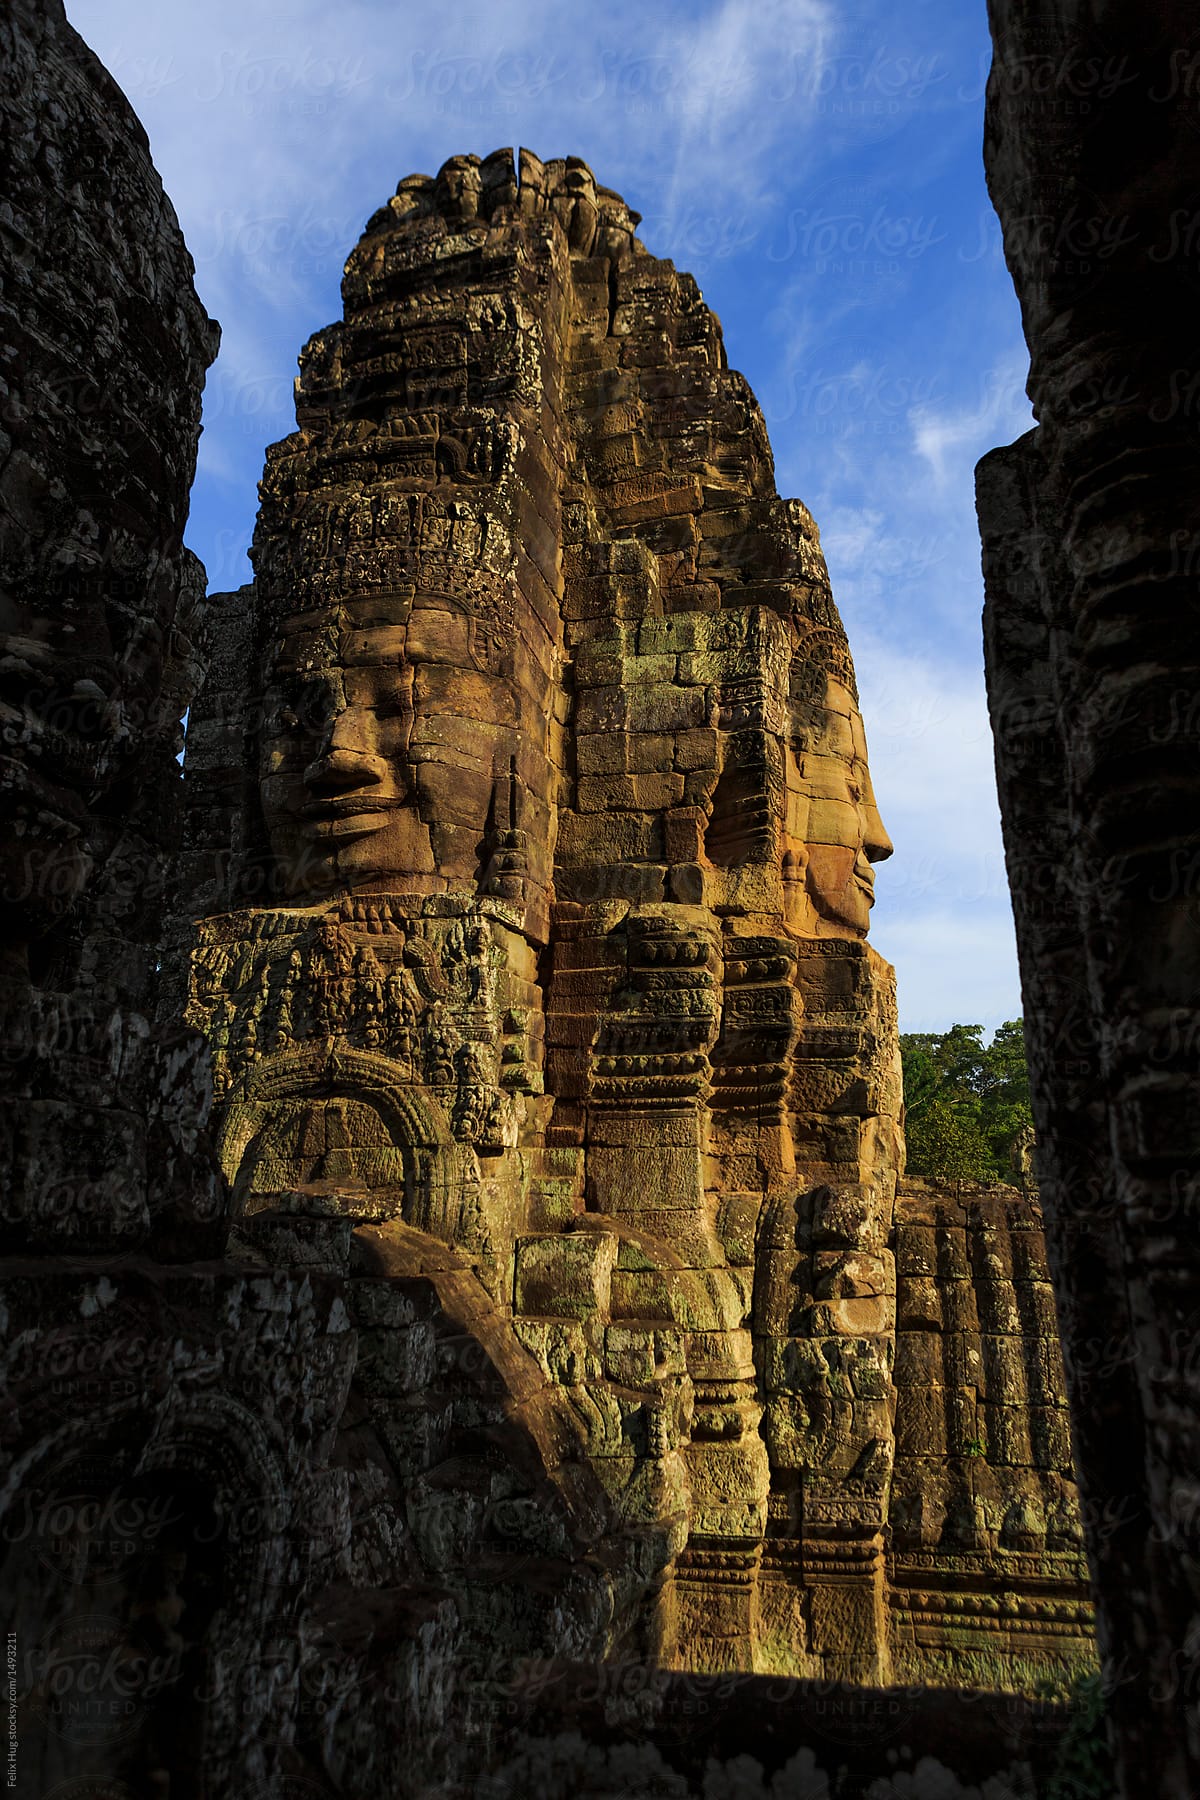 the famous stone faces of the Bayon Temple at Angkor Wat